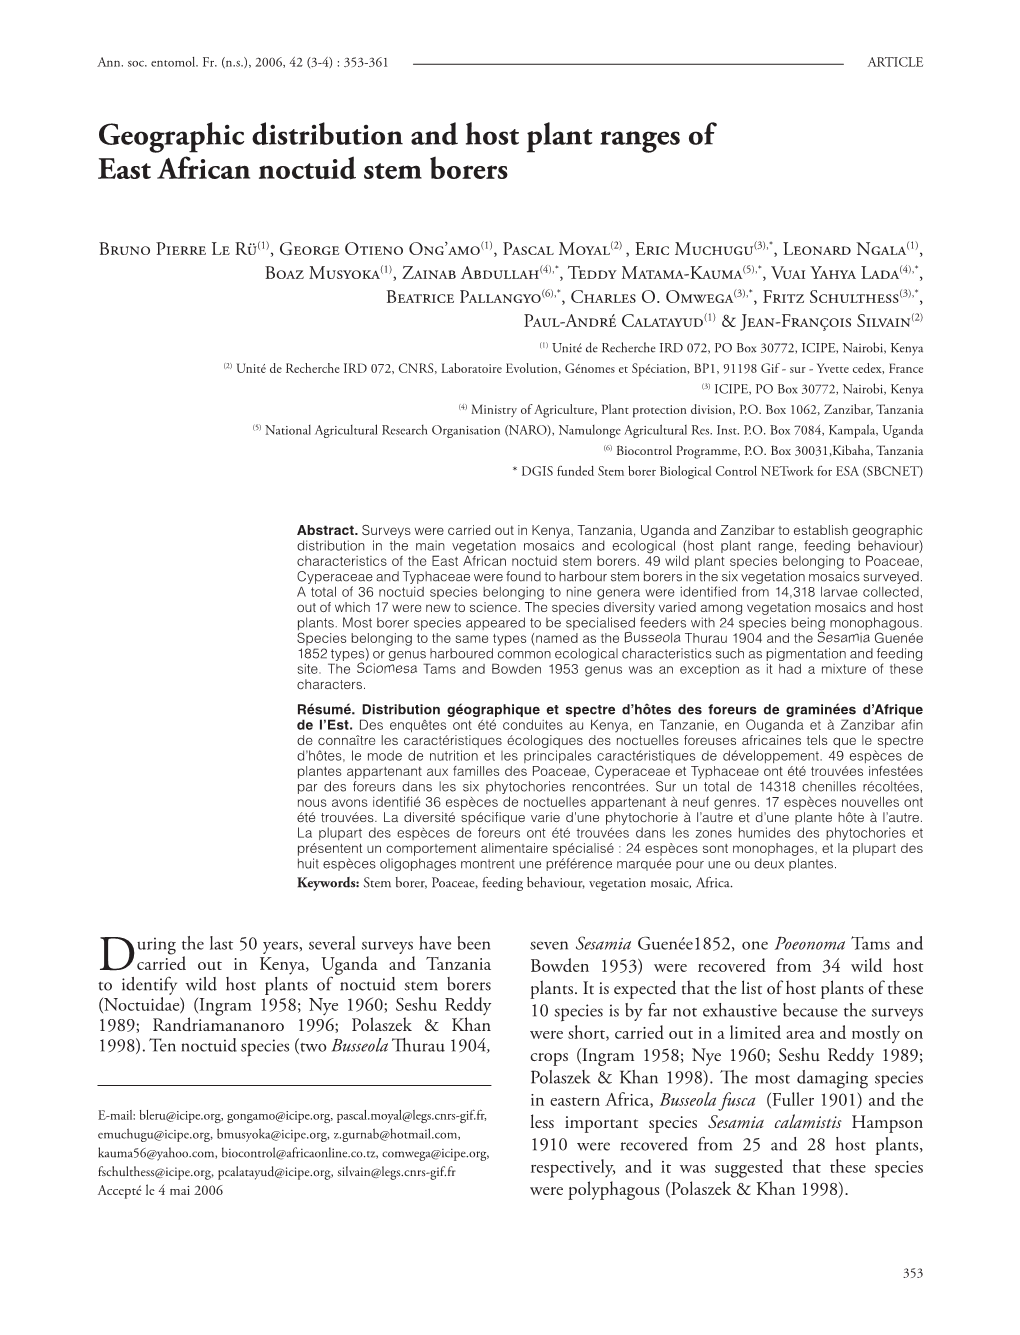 Geographic Distribution and Host Plant Ranges of East African Noctuid Stem Borers